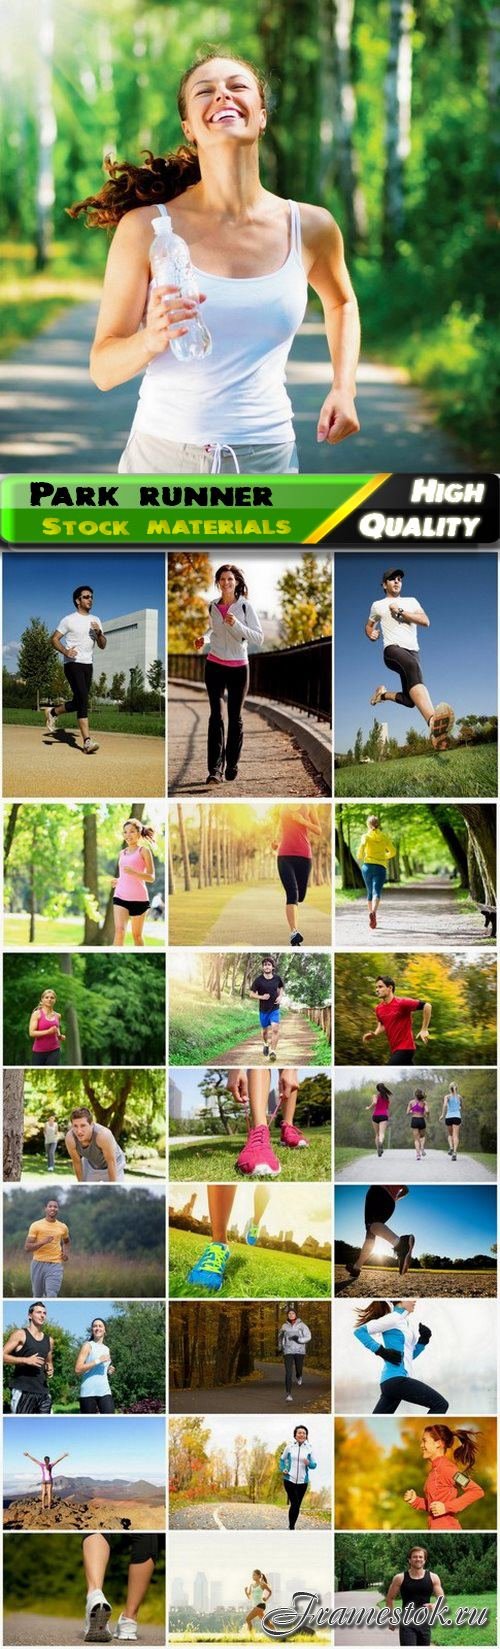 Park runner and sporting people with perfect body outdoor run - 25 HQ Jpg